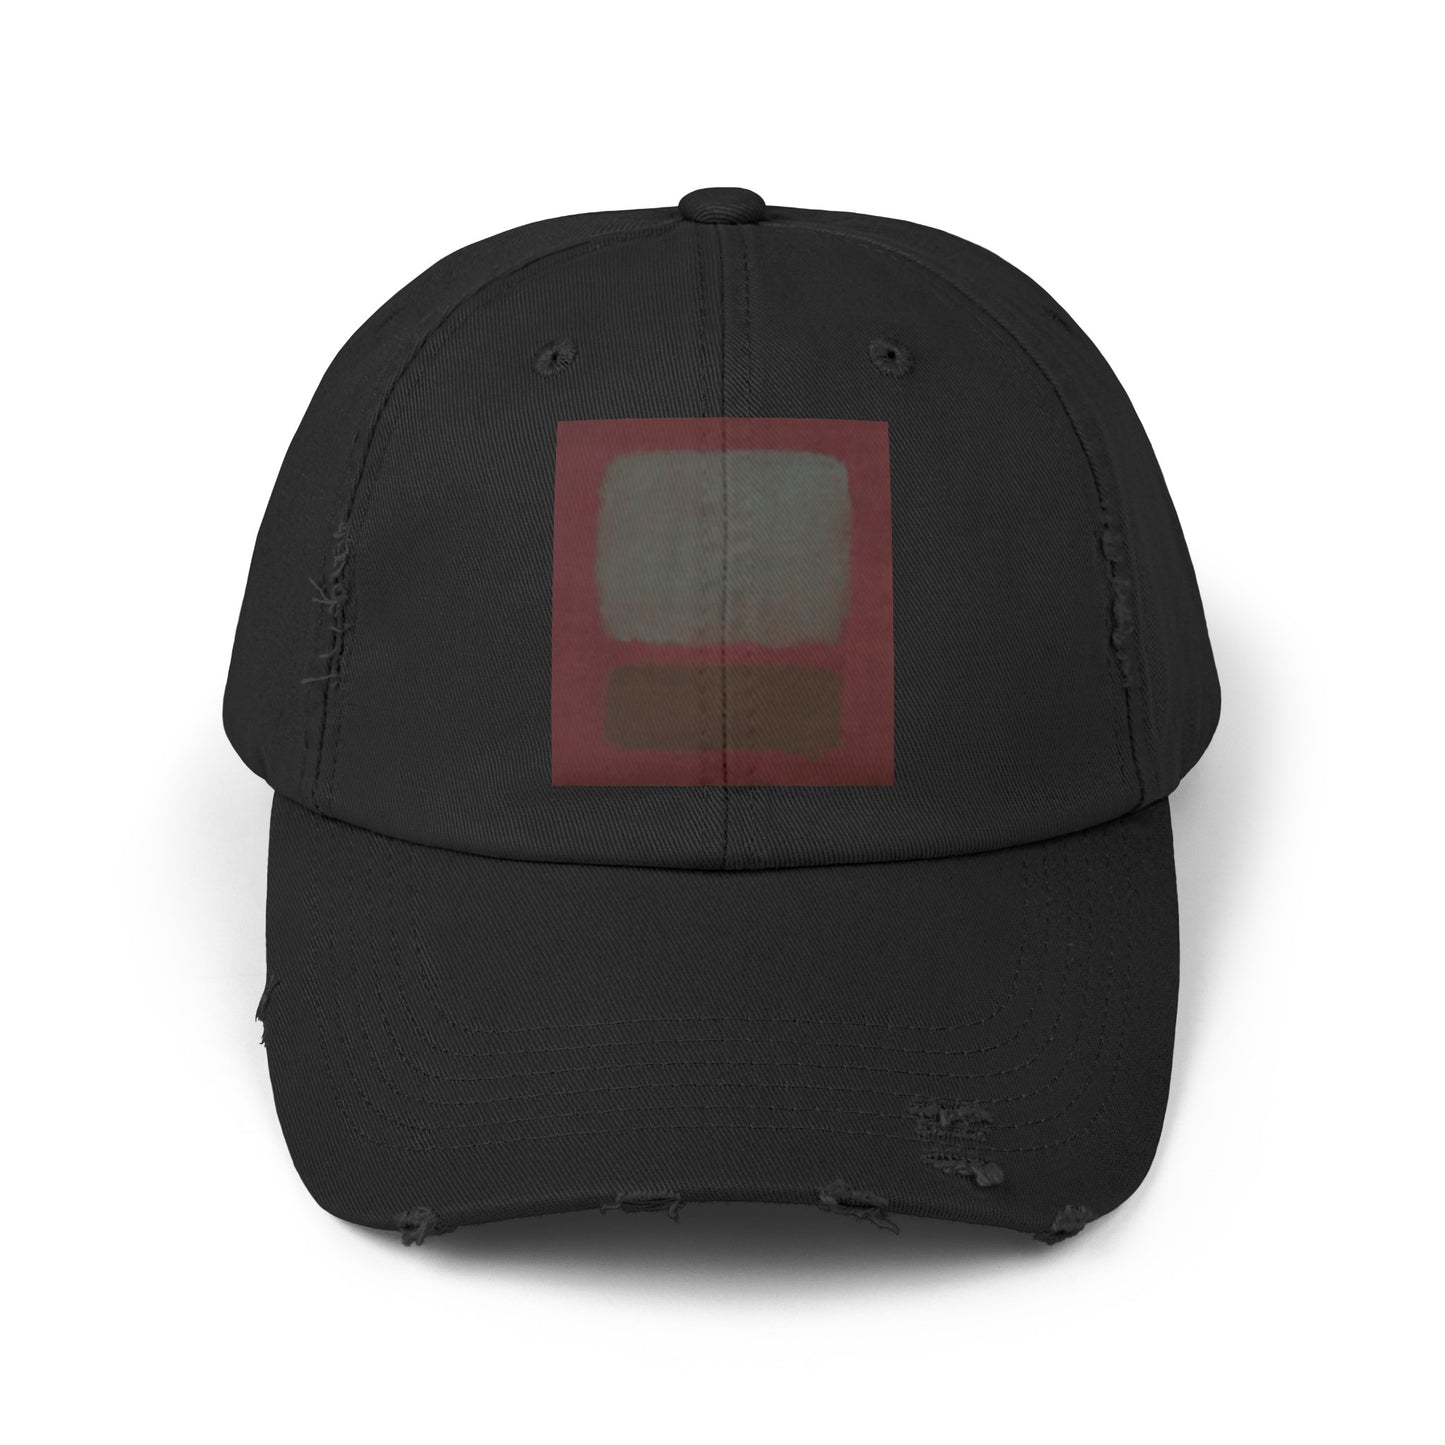 a black hat with a red square on it